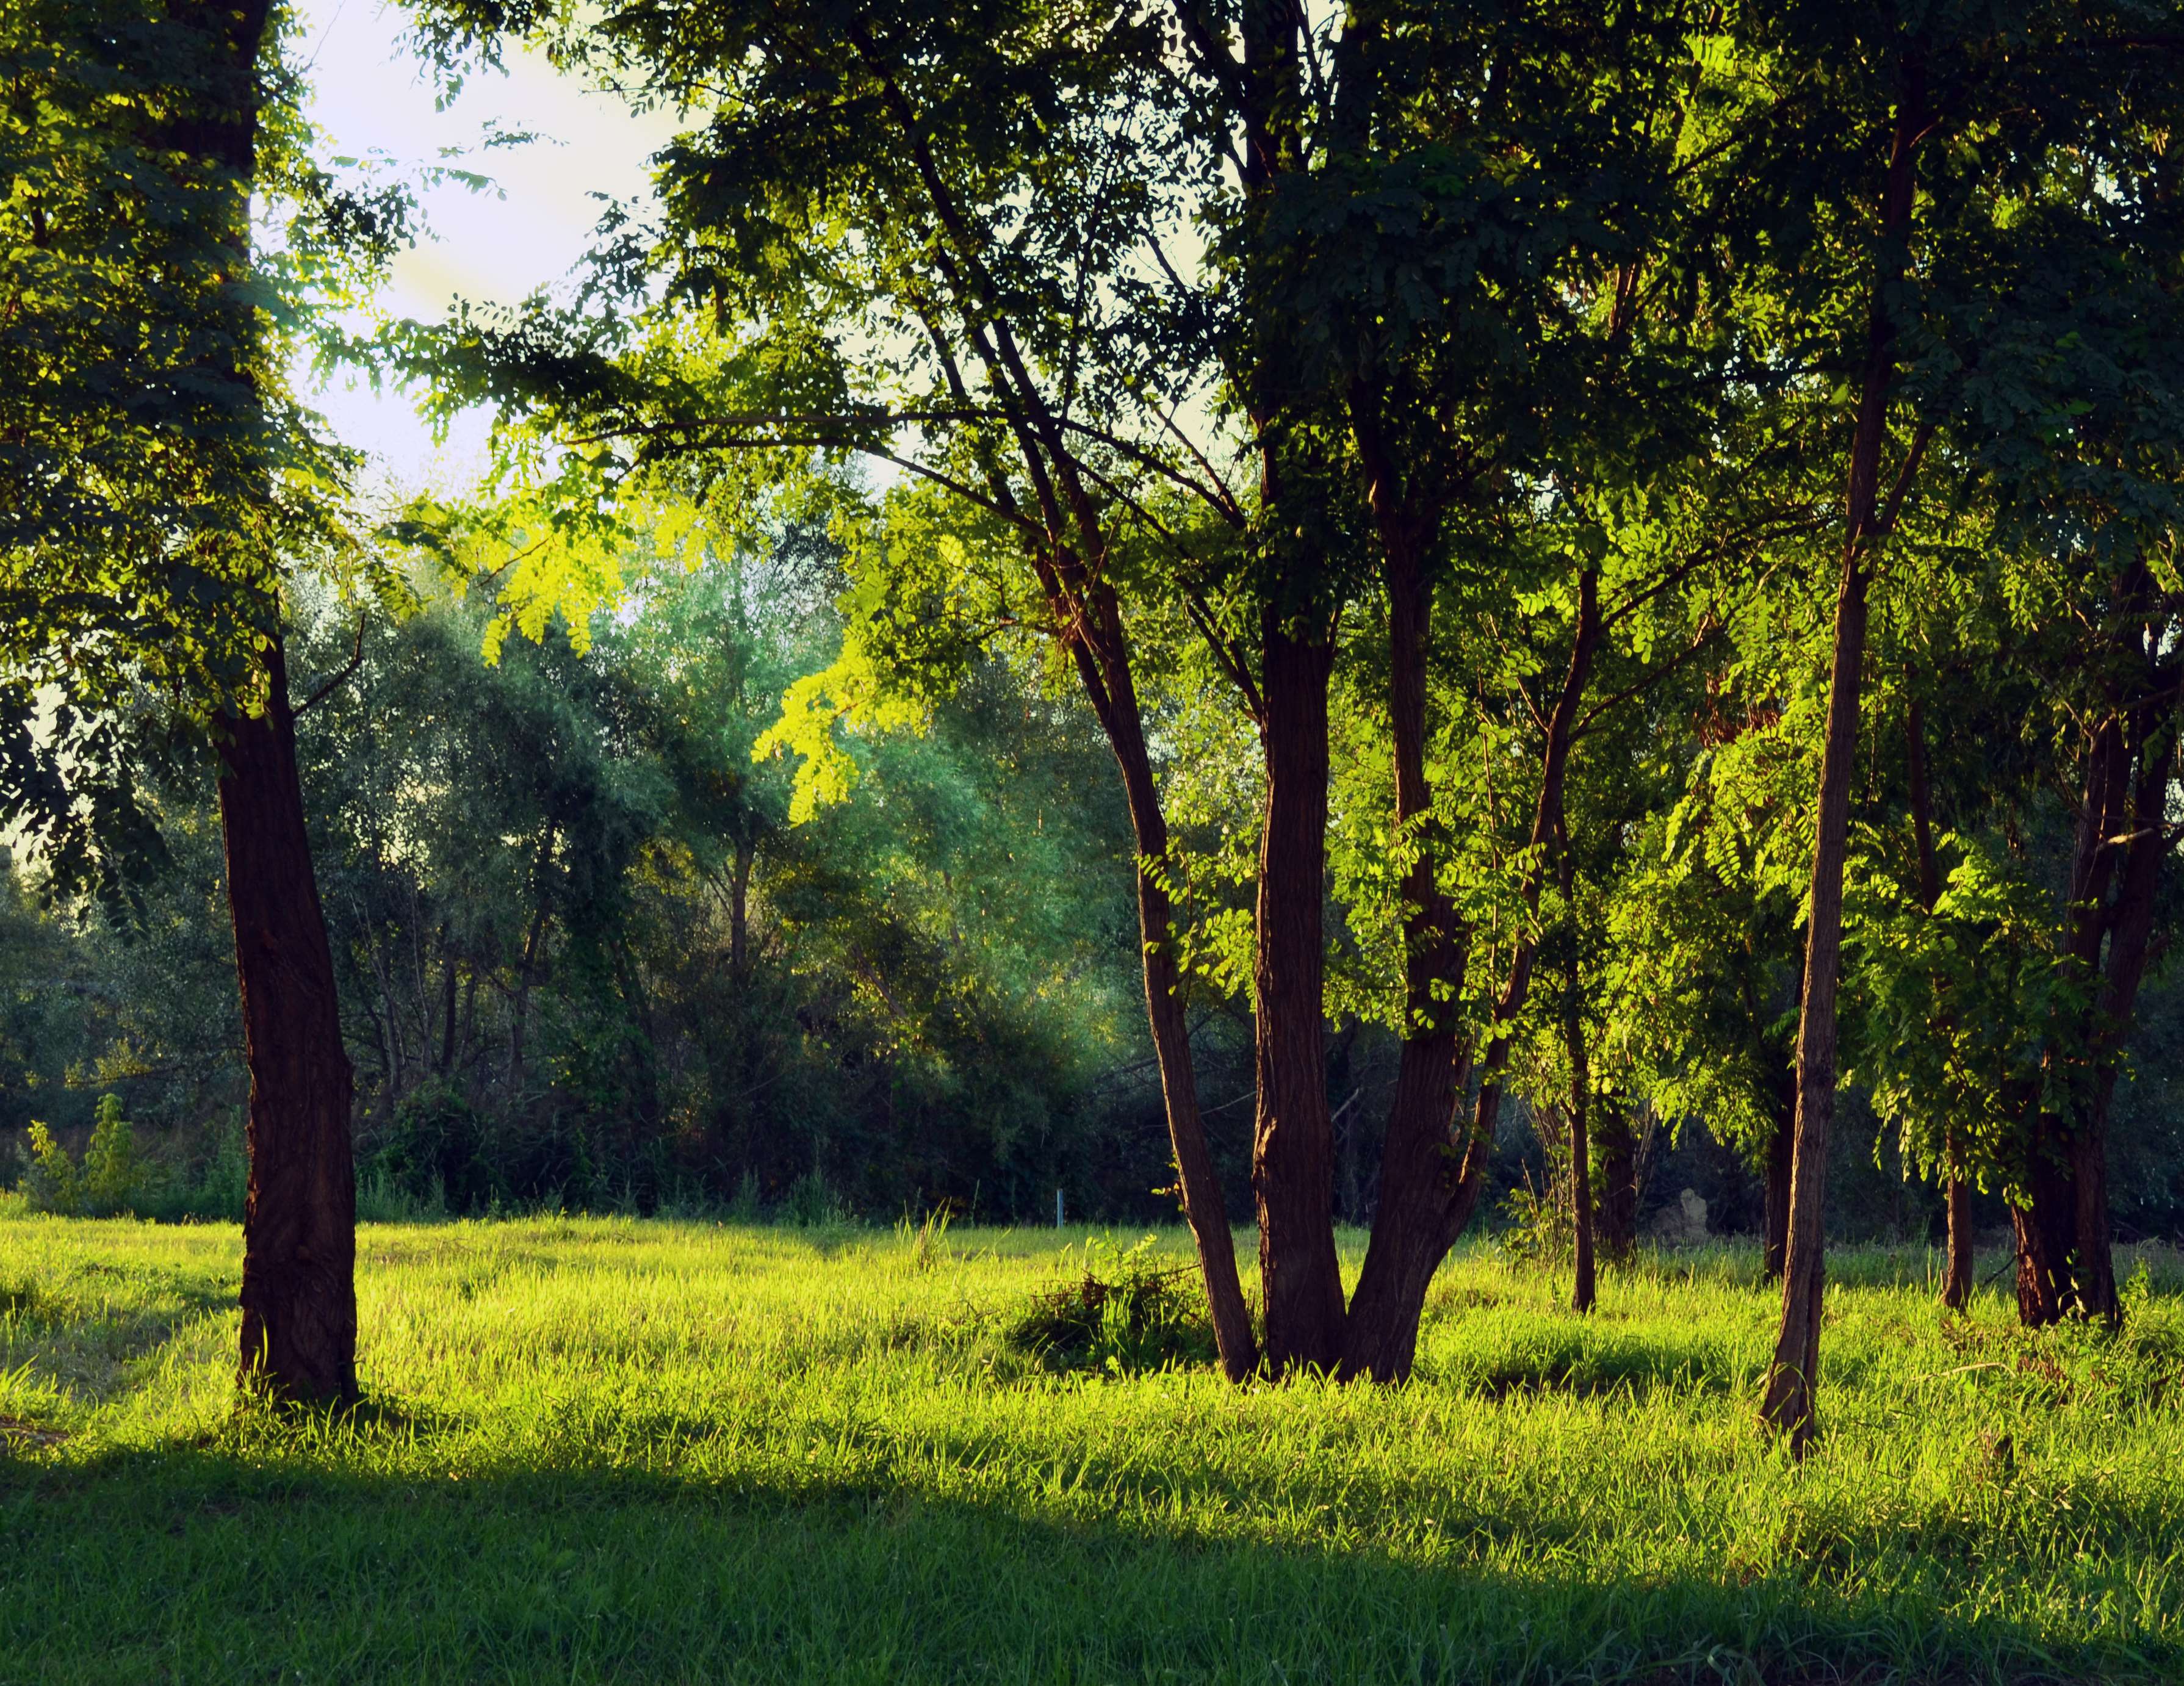 countryside, environment, forest, grass, green